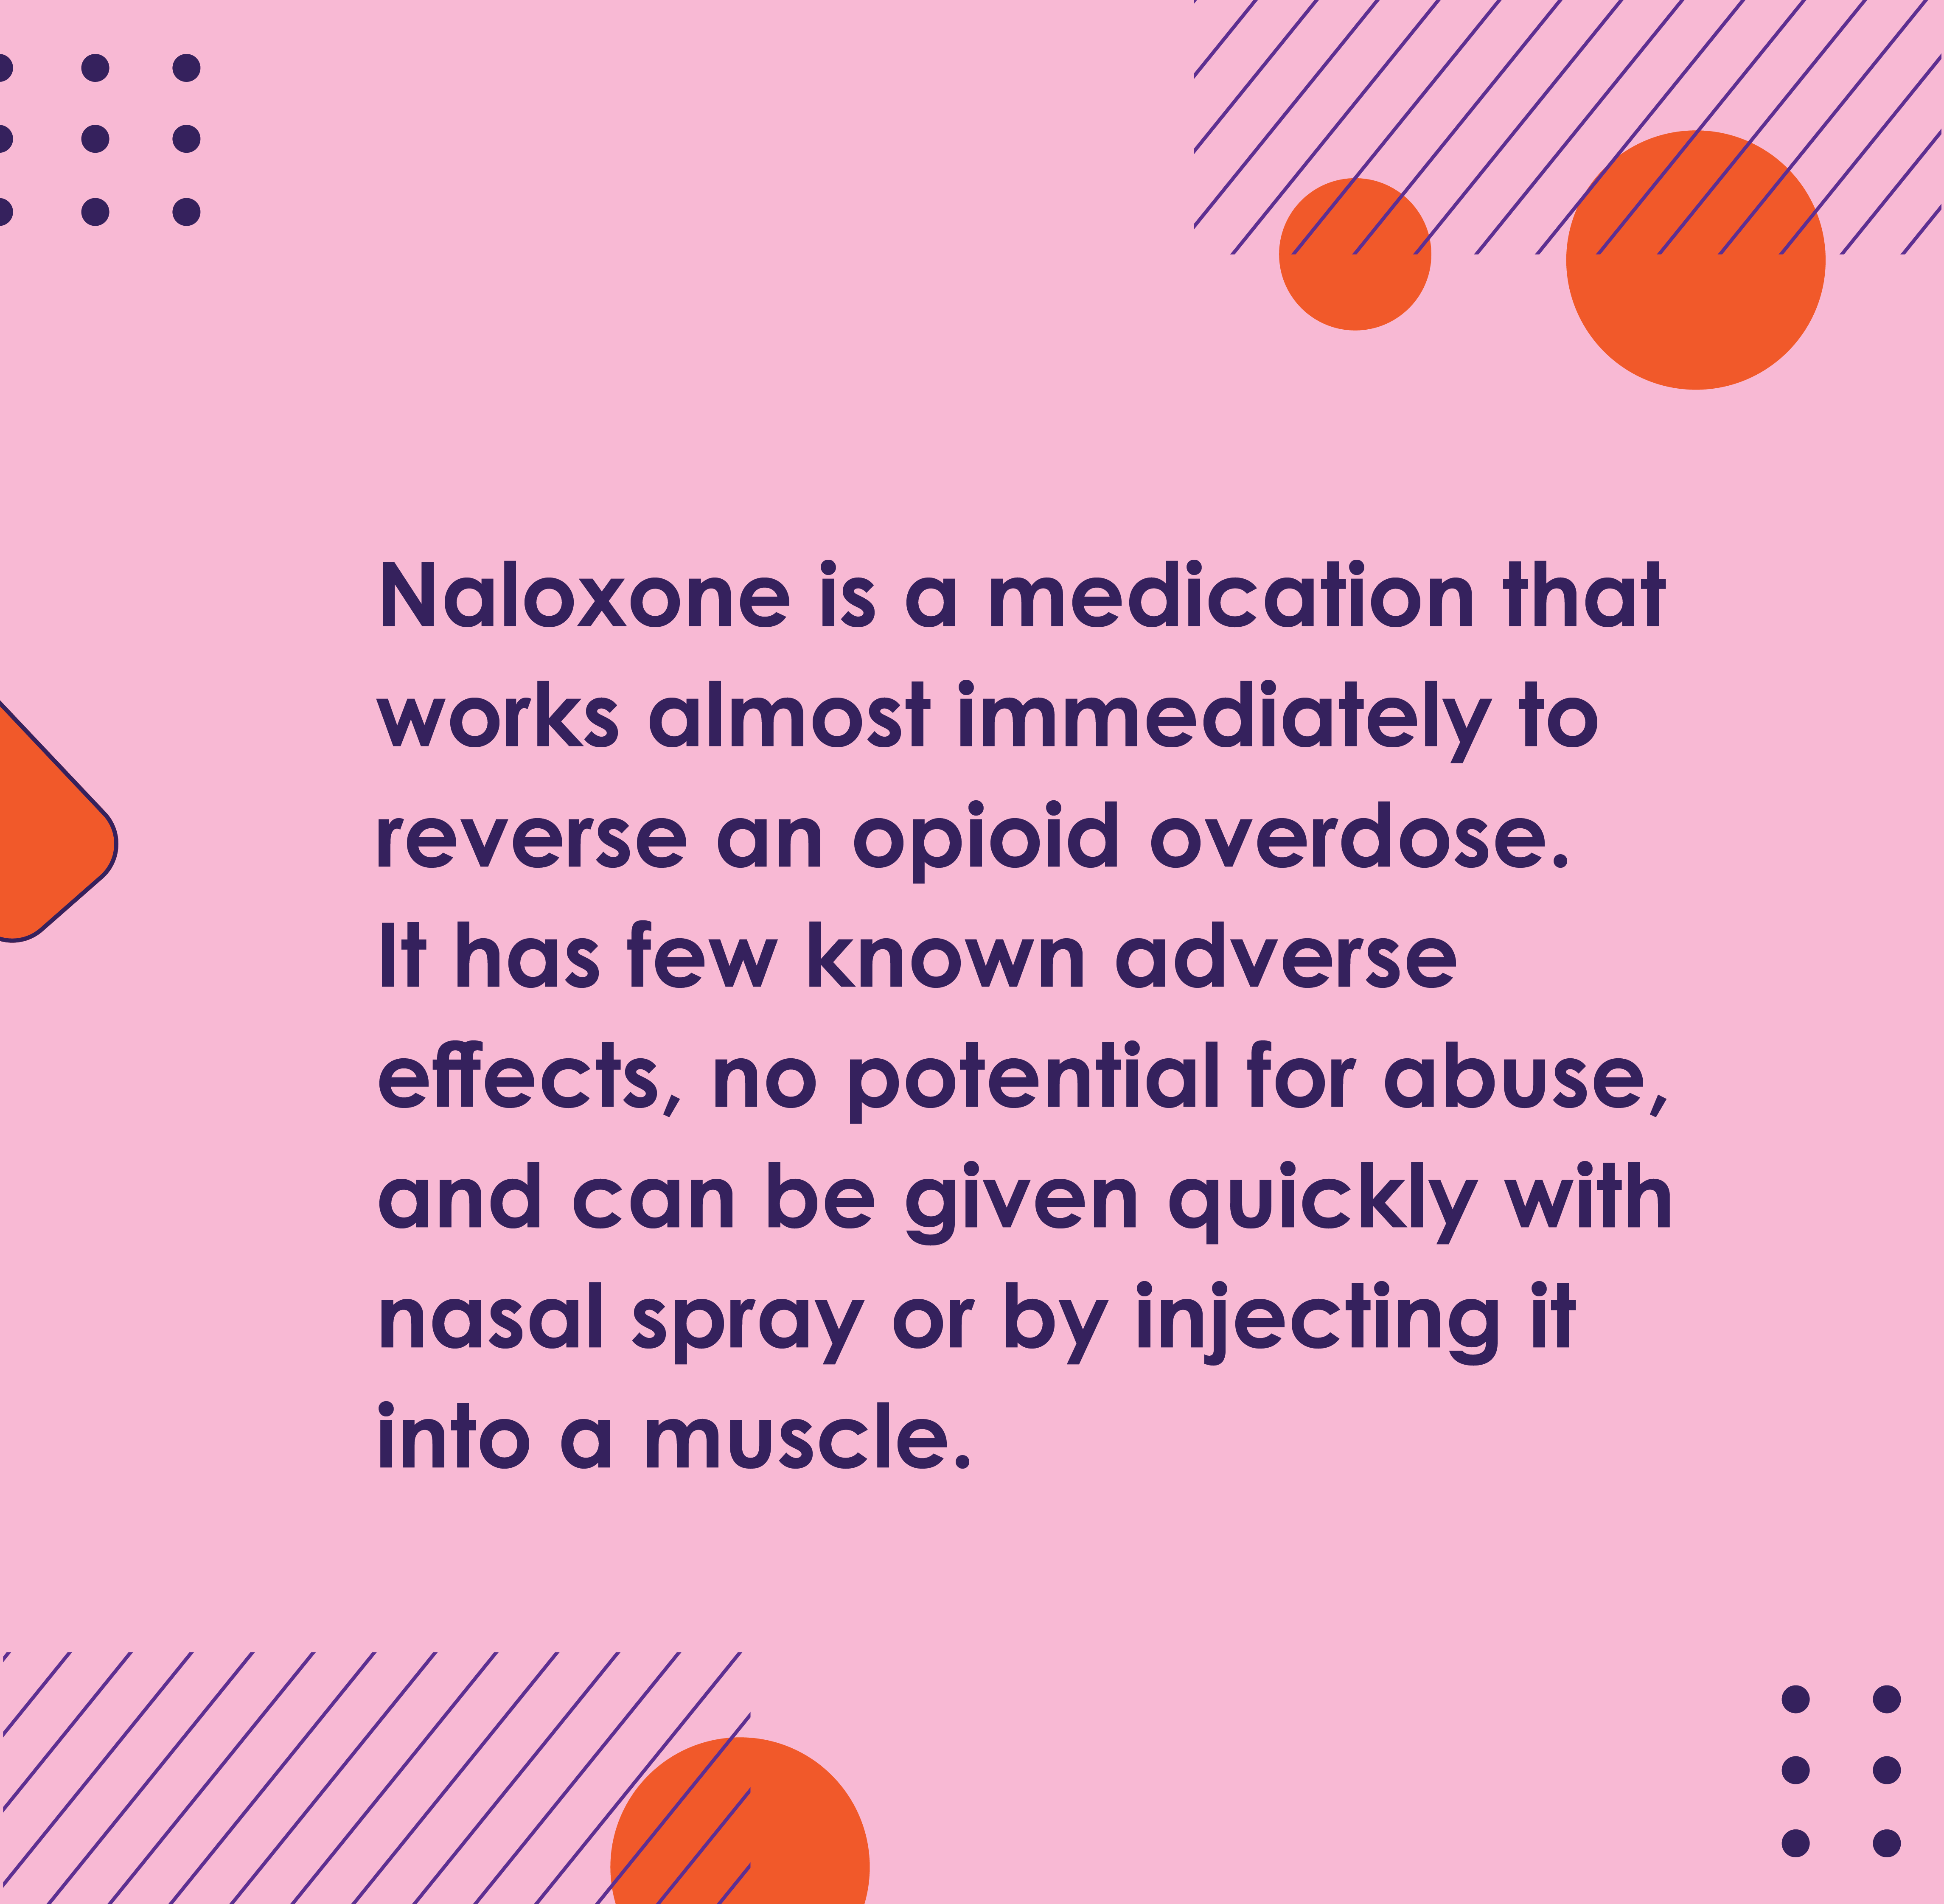 Naloxone is a medication that works almost immediately to revers an opioid overdose